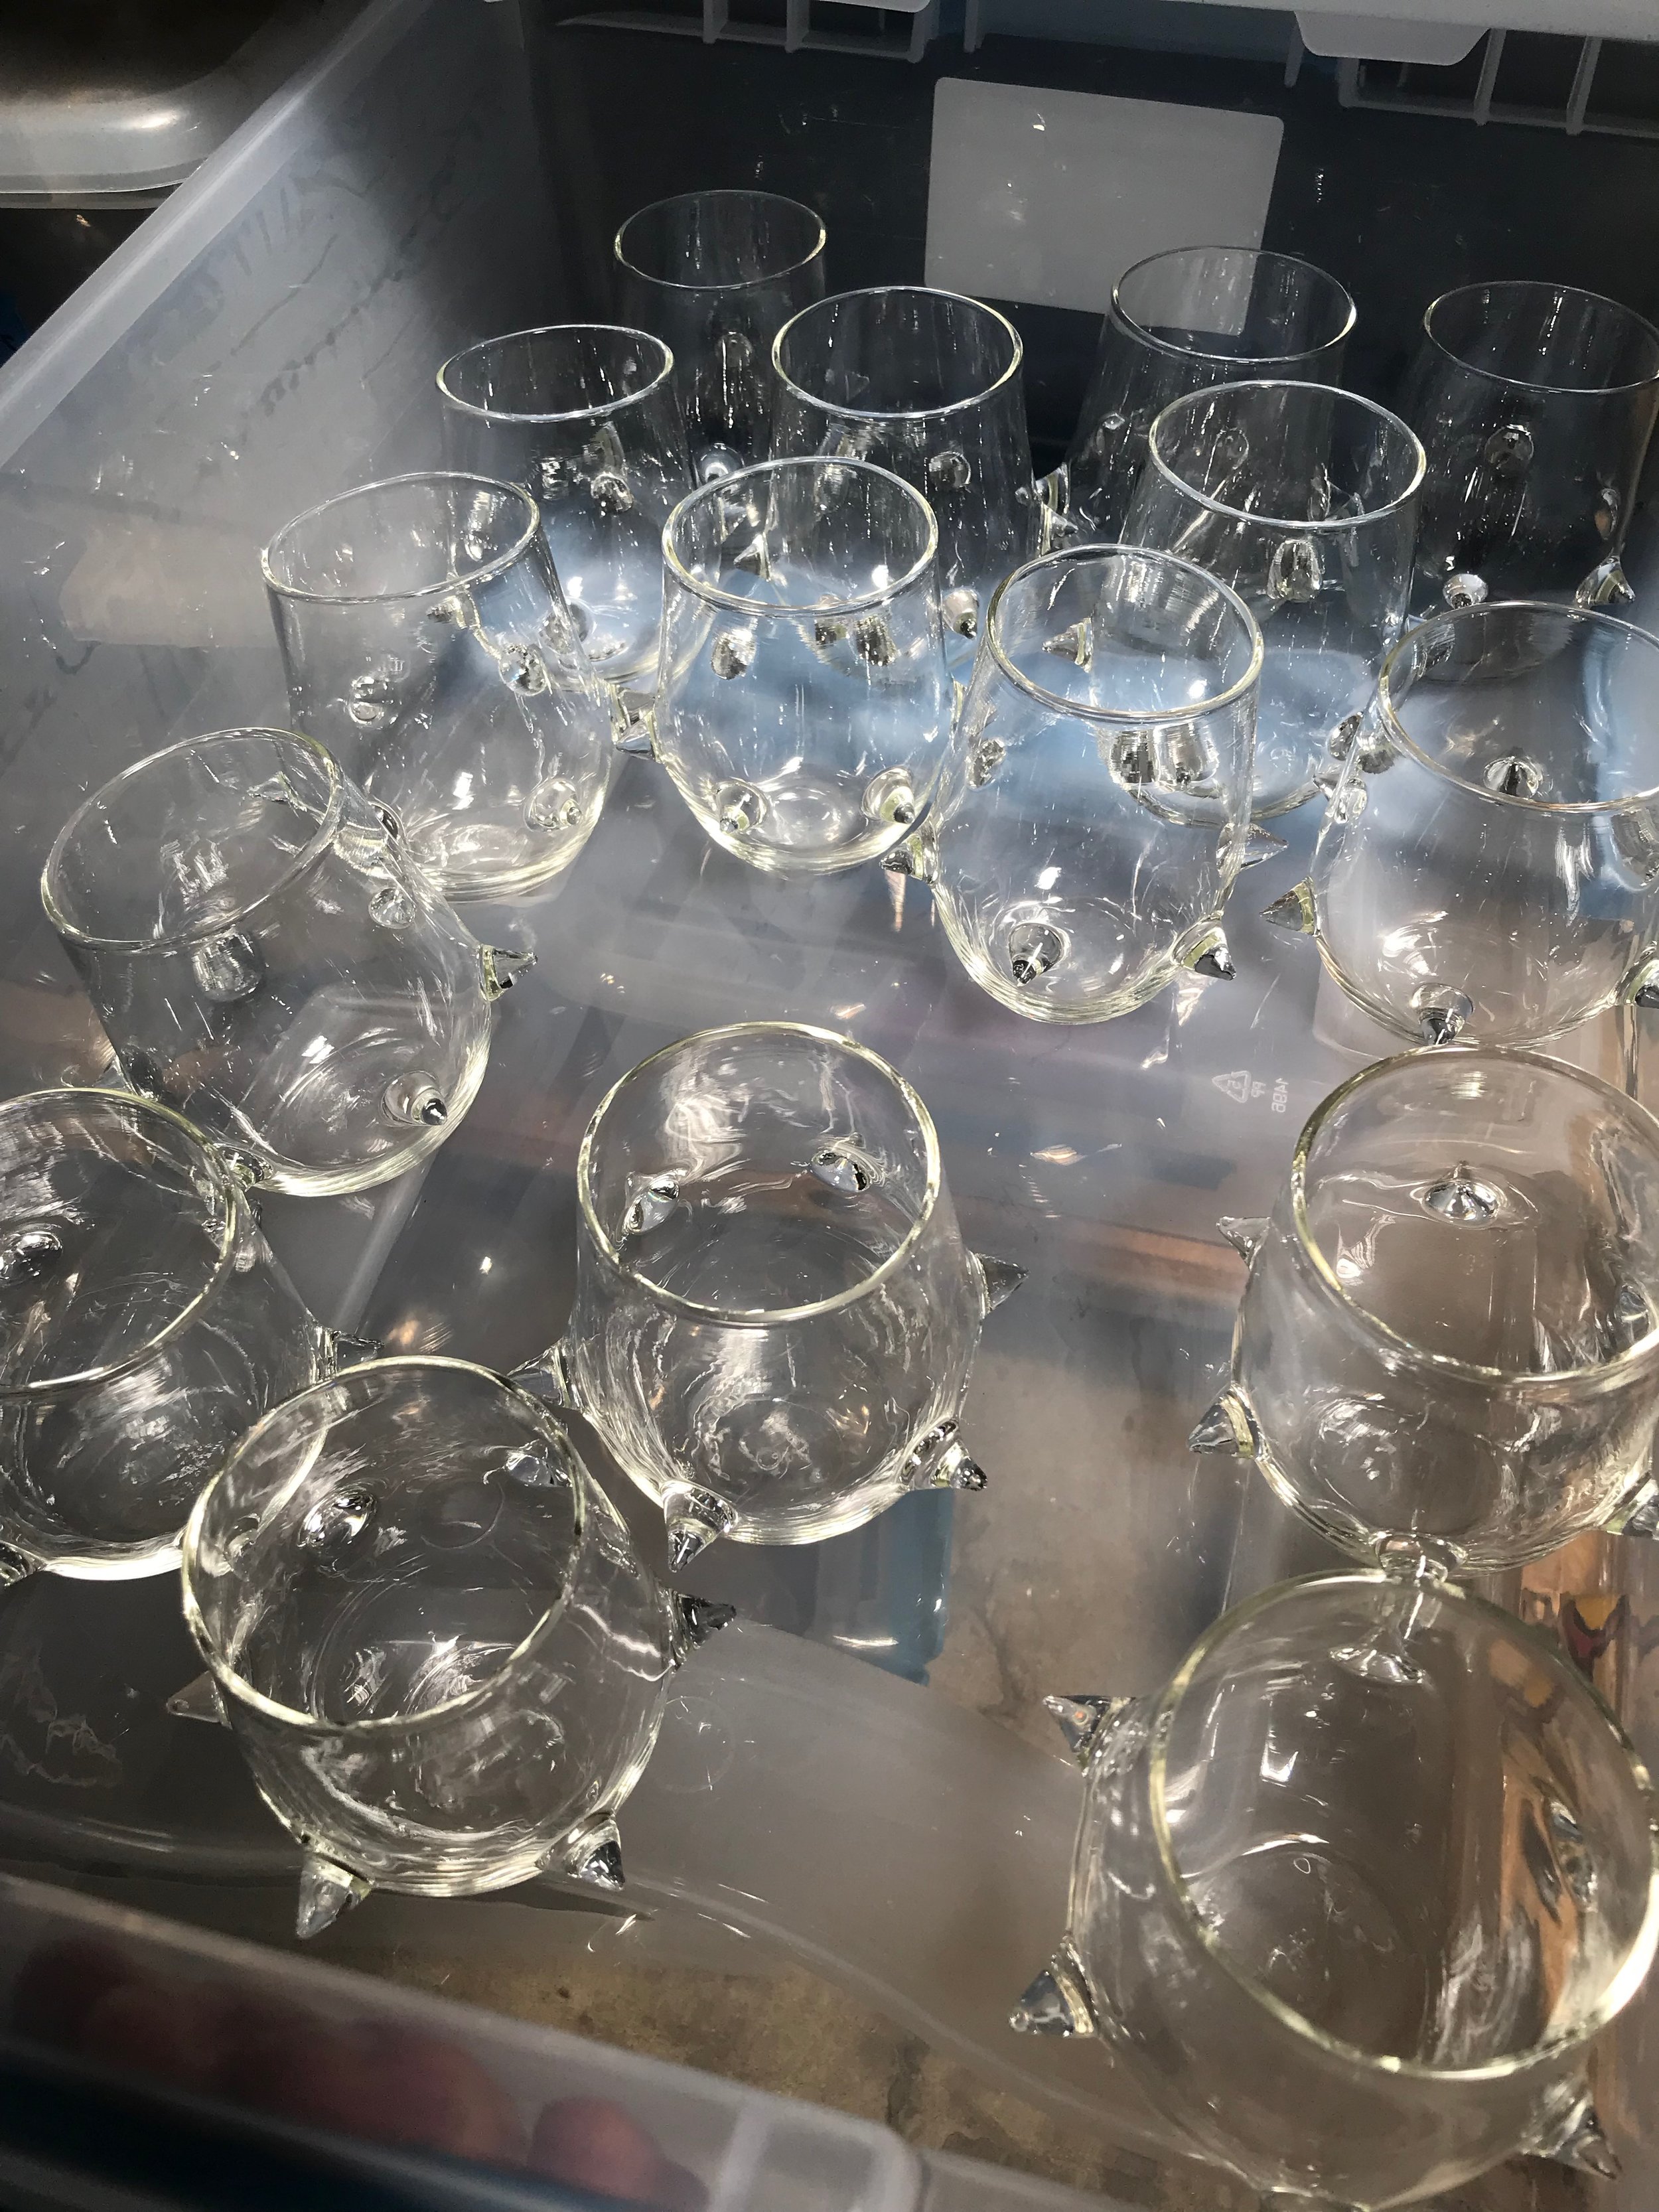  Nearly ready! Our glasses await their golden detail. 